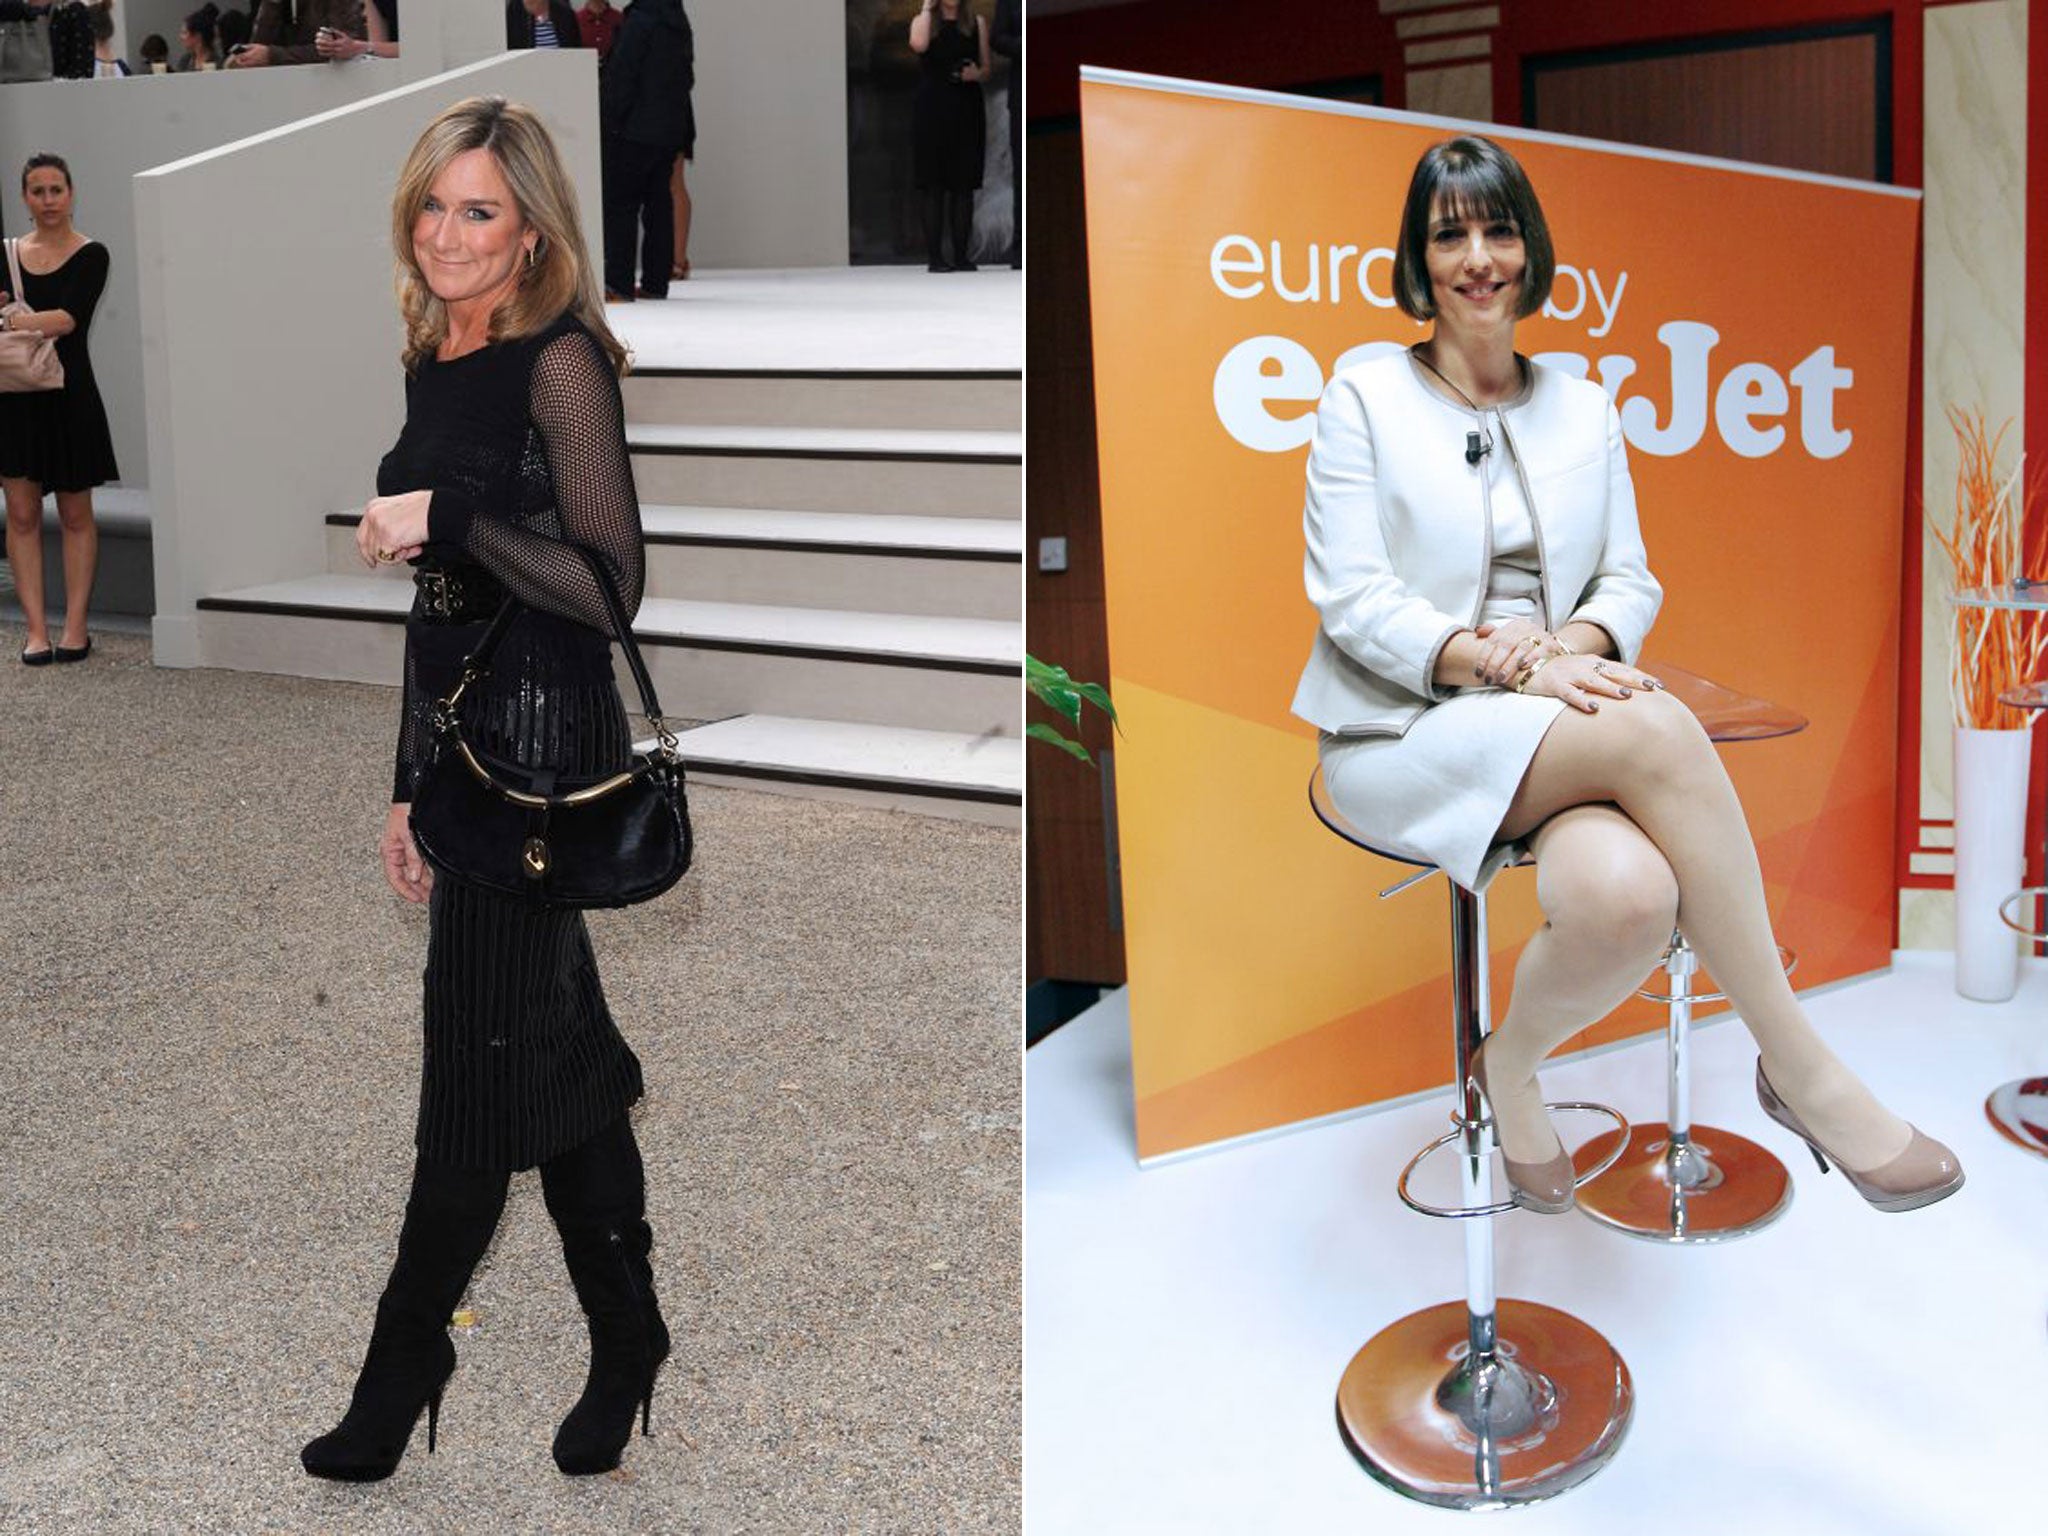 Current top female CEOs include Burberry's Angela Ahrendts, left, and easyjet’s Carolyn McCall, right